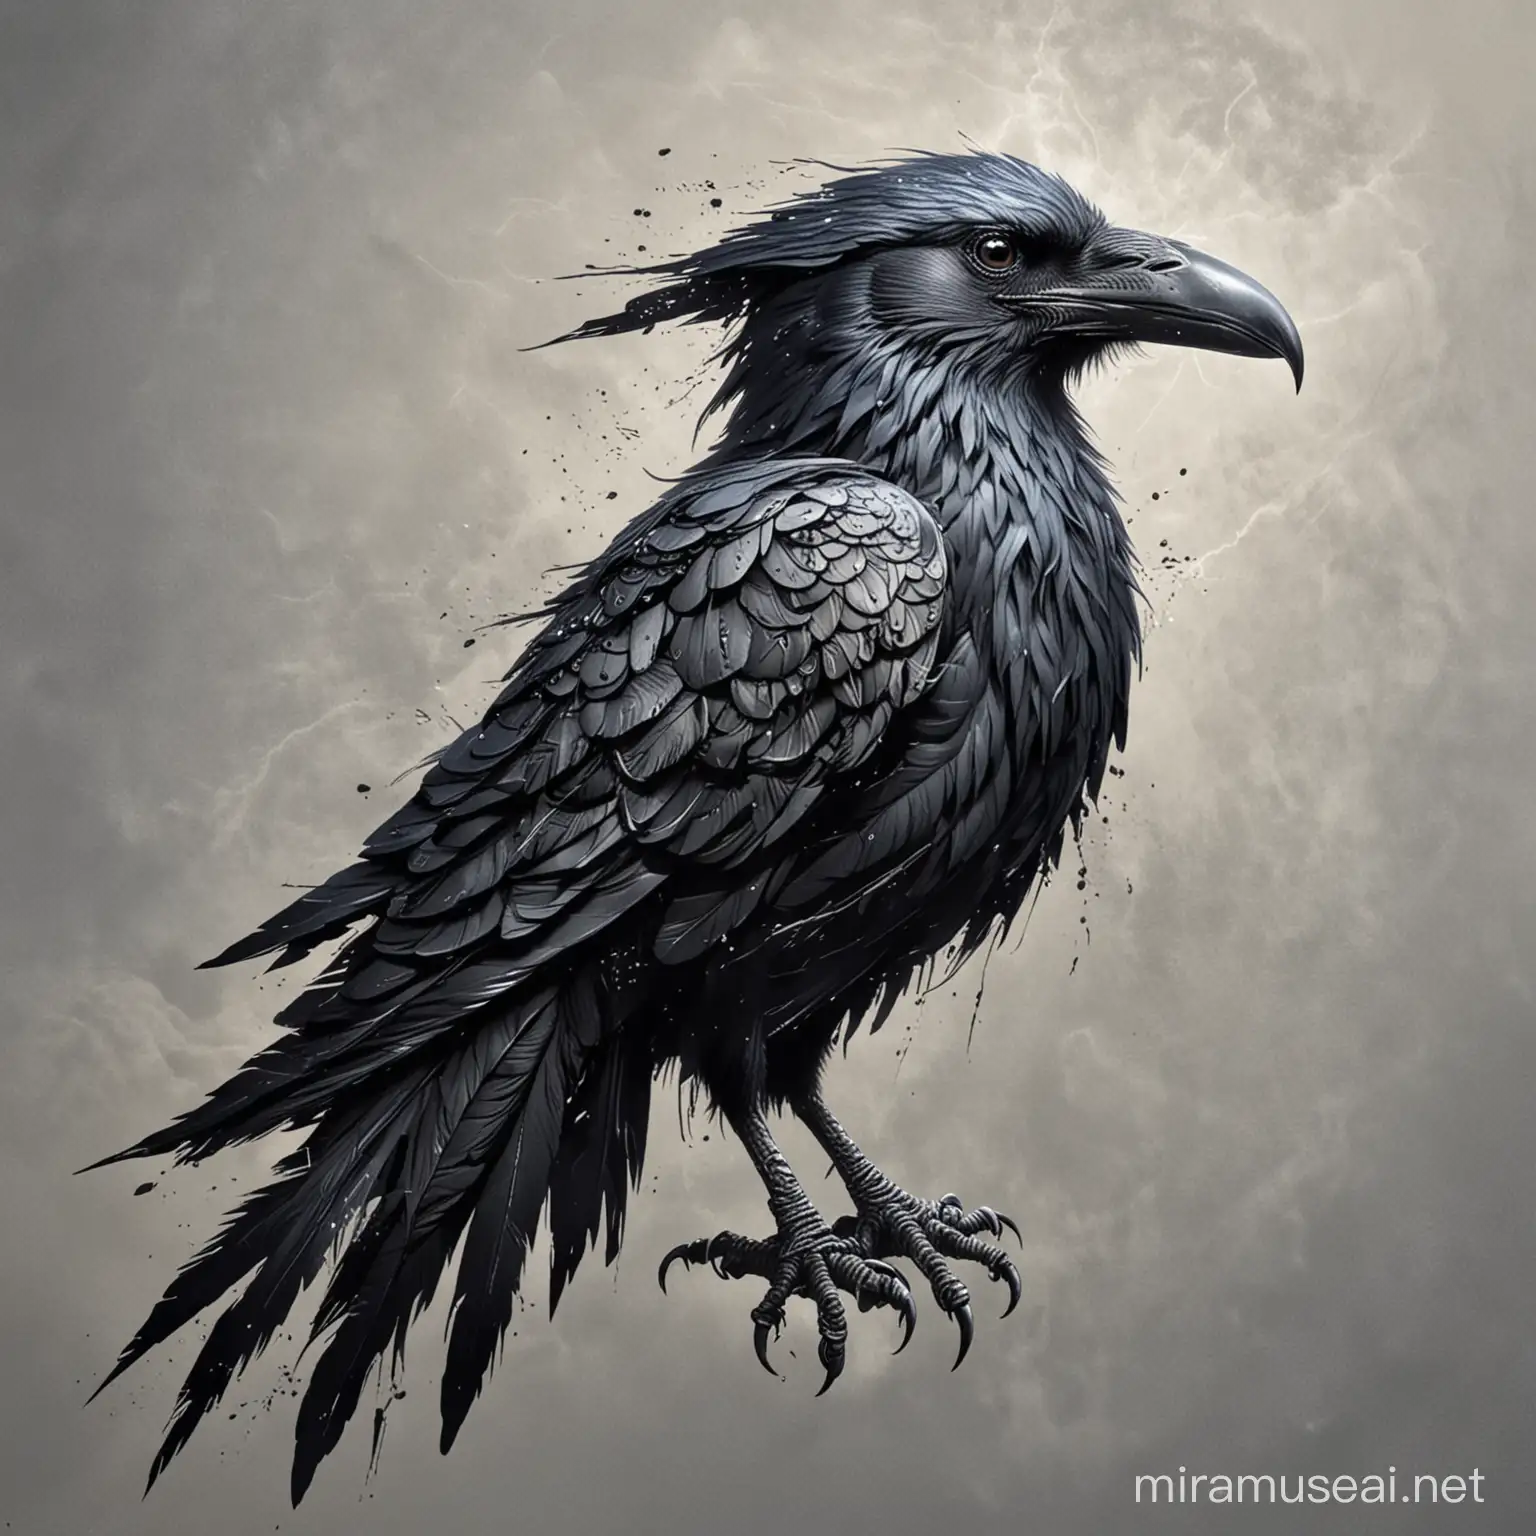 Majestic Thunder Bird Flying in Crow Form